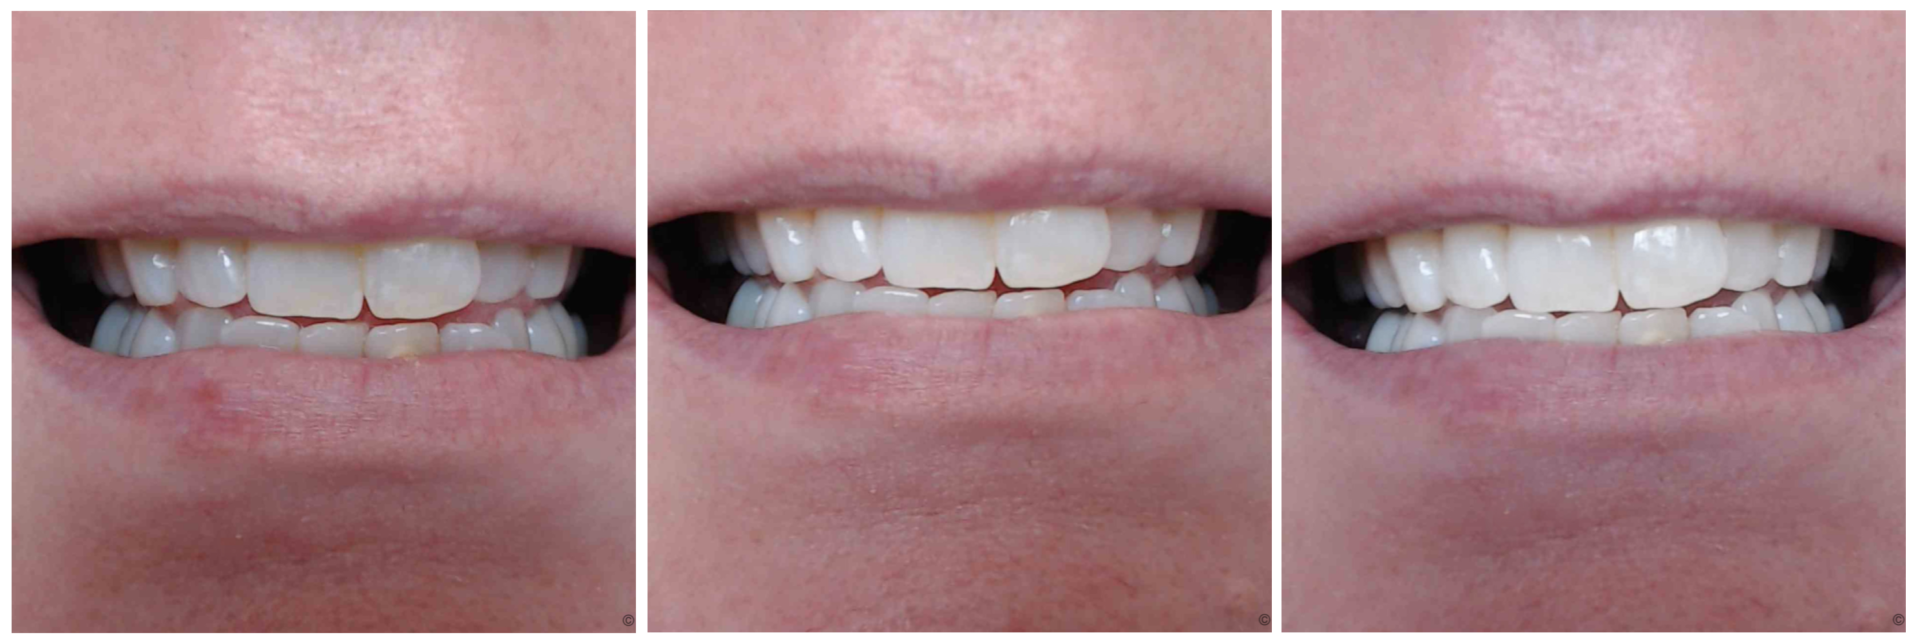 Whitening Strips Whiter Teeth In Just 14 Days Boxnip A UK Beauty amp Lifestyle Blog